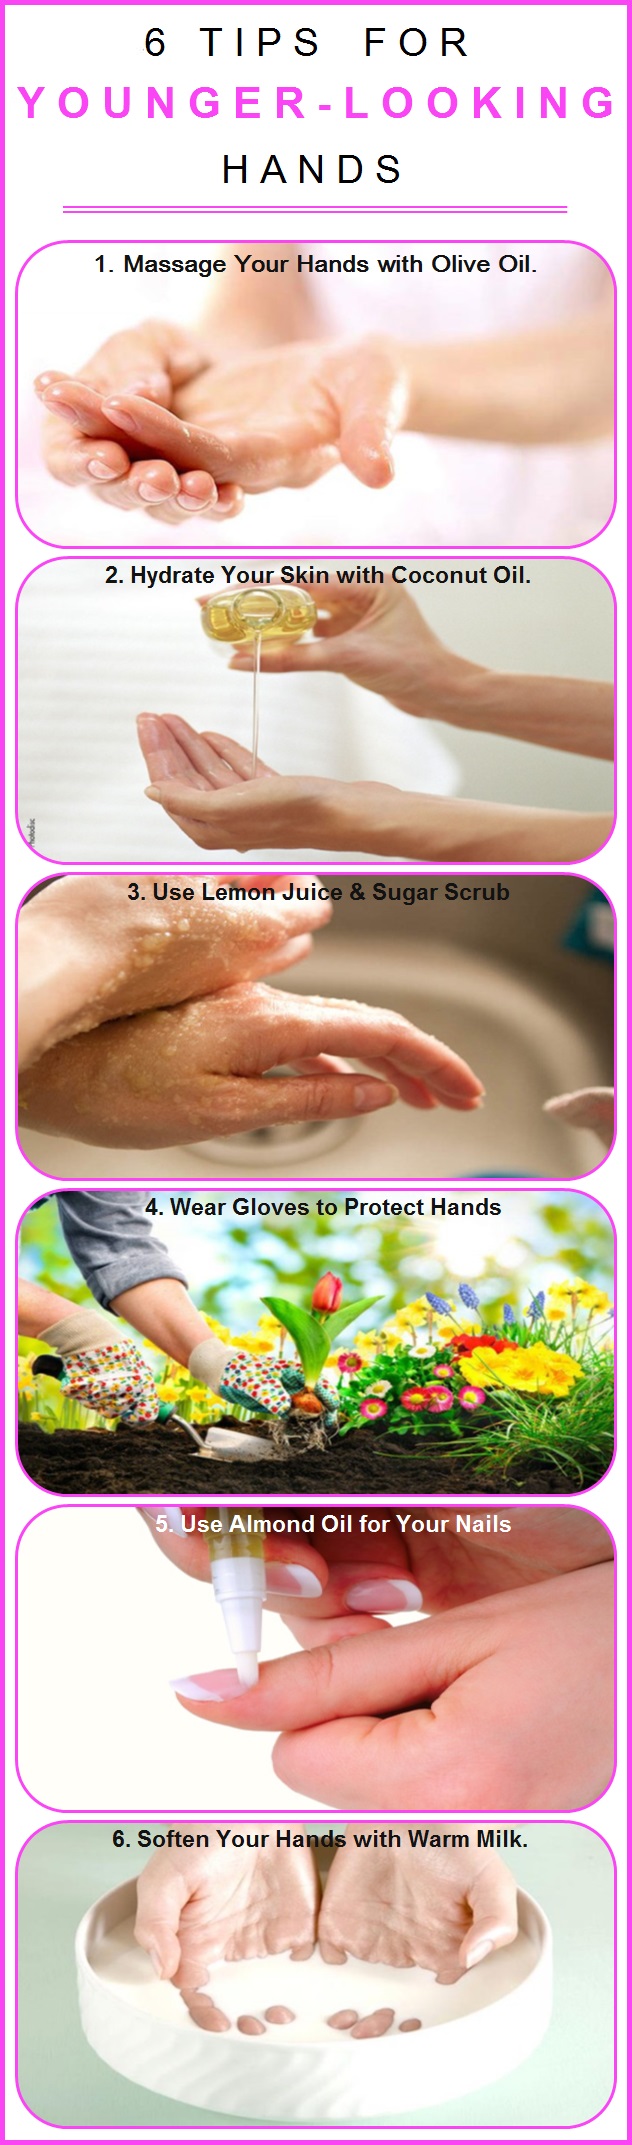 Simple Tips For Taking Better Care Of Your Hands Infographic